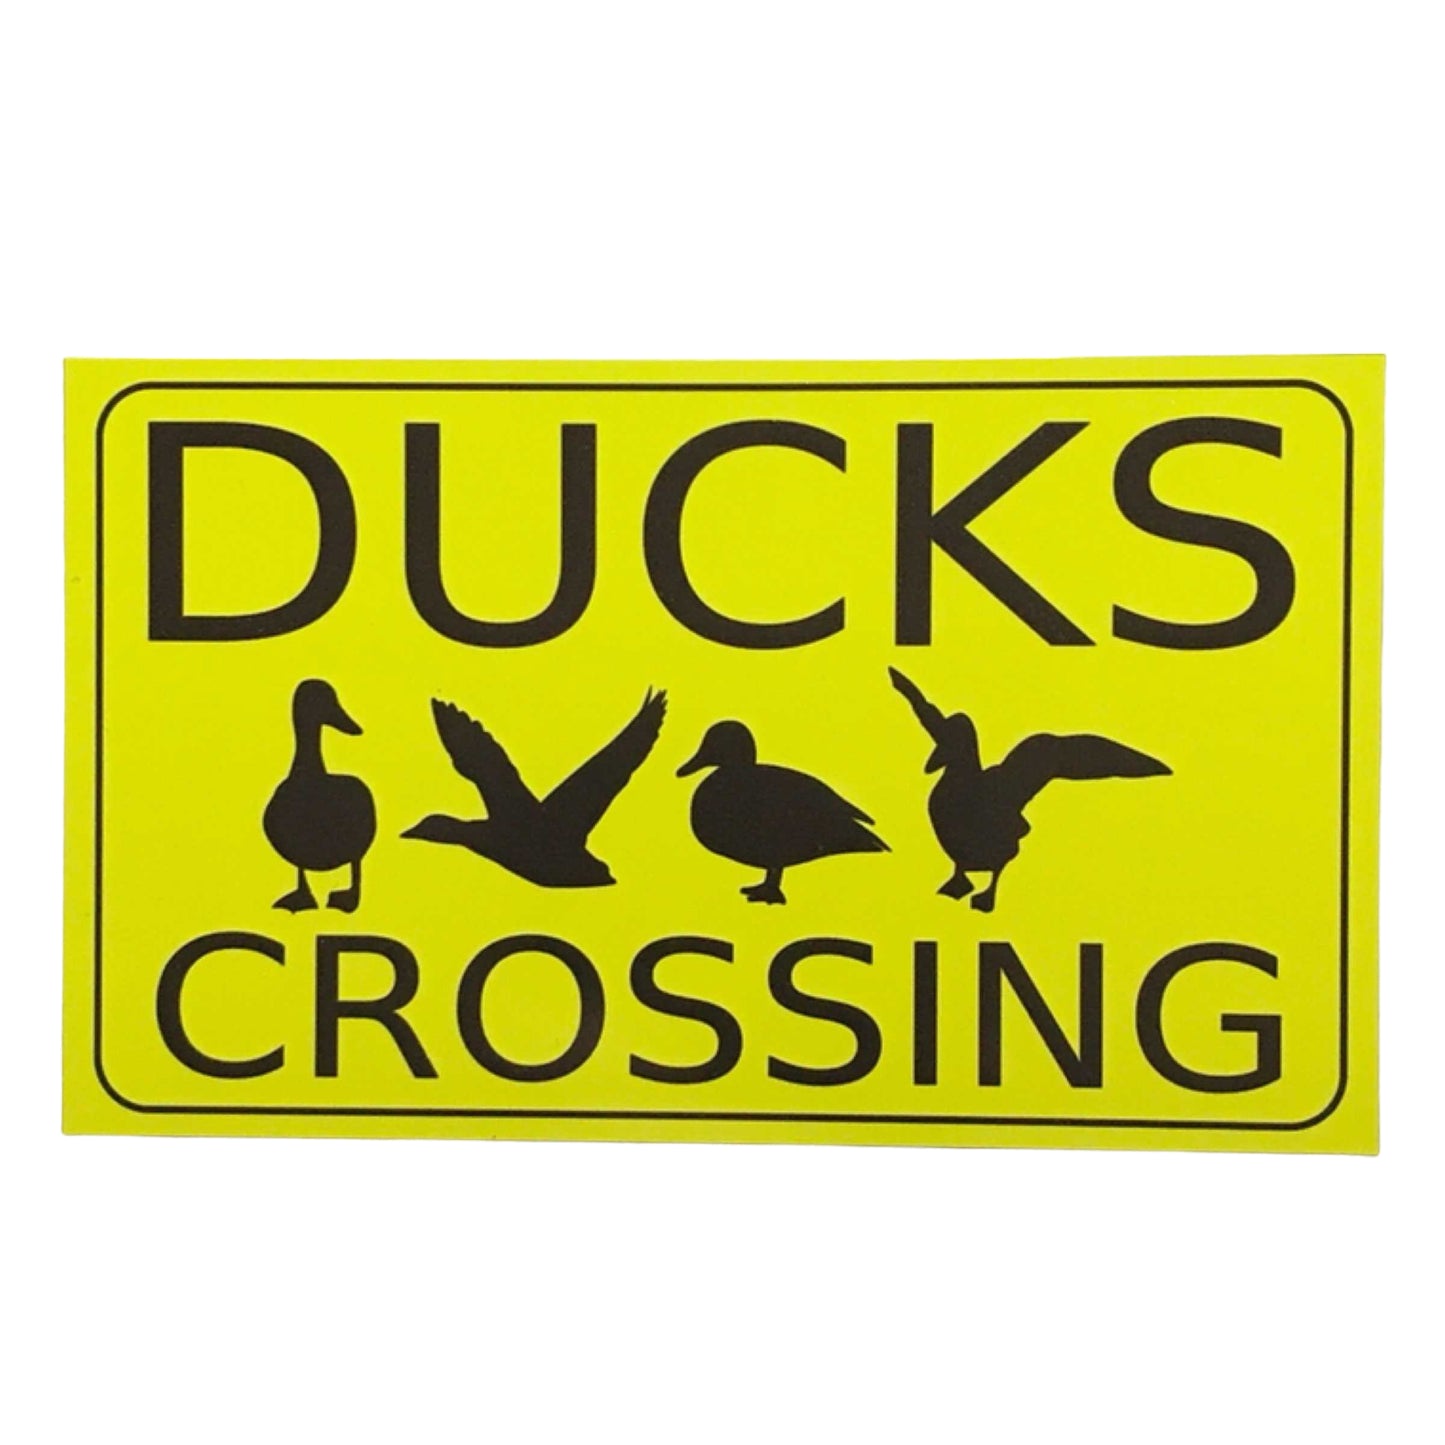 Ducks Crossing Sign - The Renmy Store Homewares & Gifts 